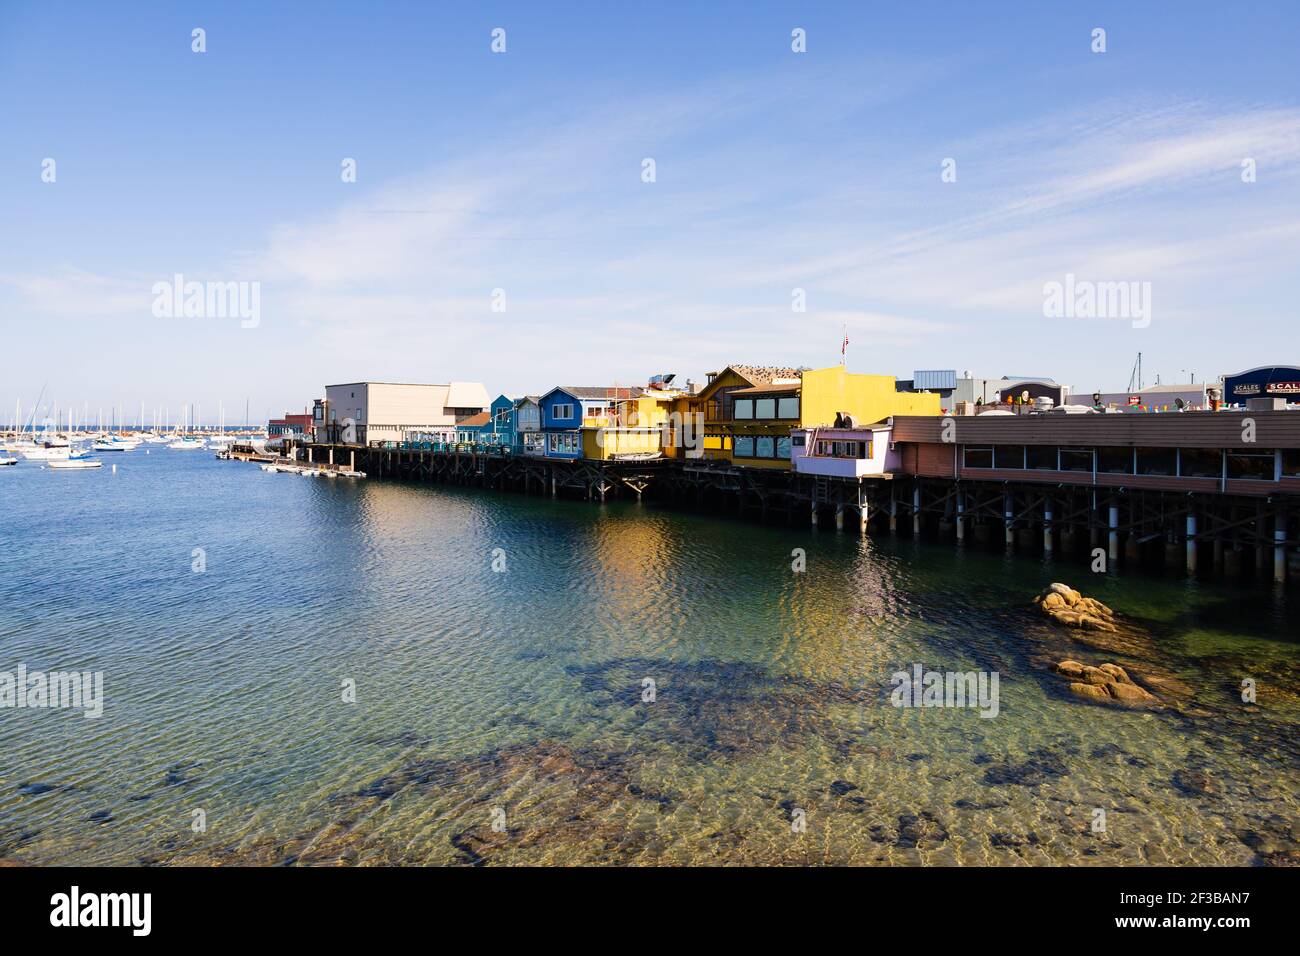 Old Fishermans Wharf. Old Monterey, California, United States of America. Stock Photo